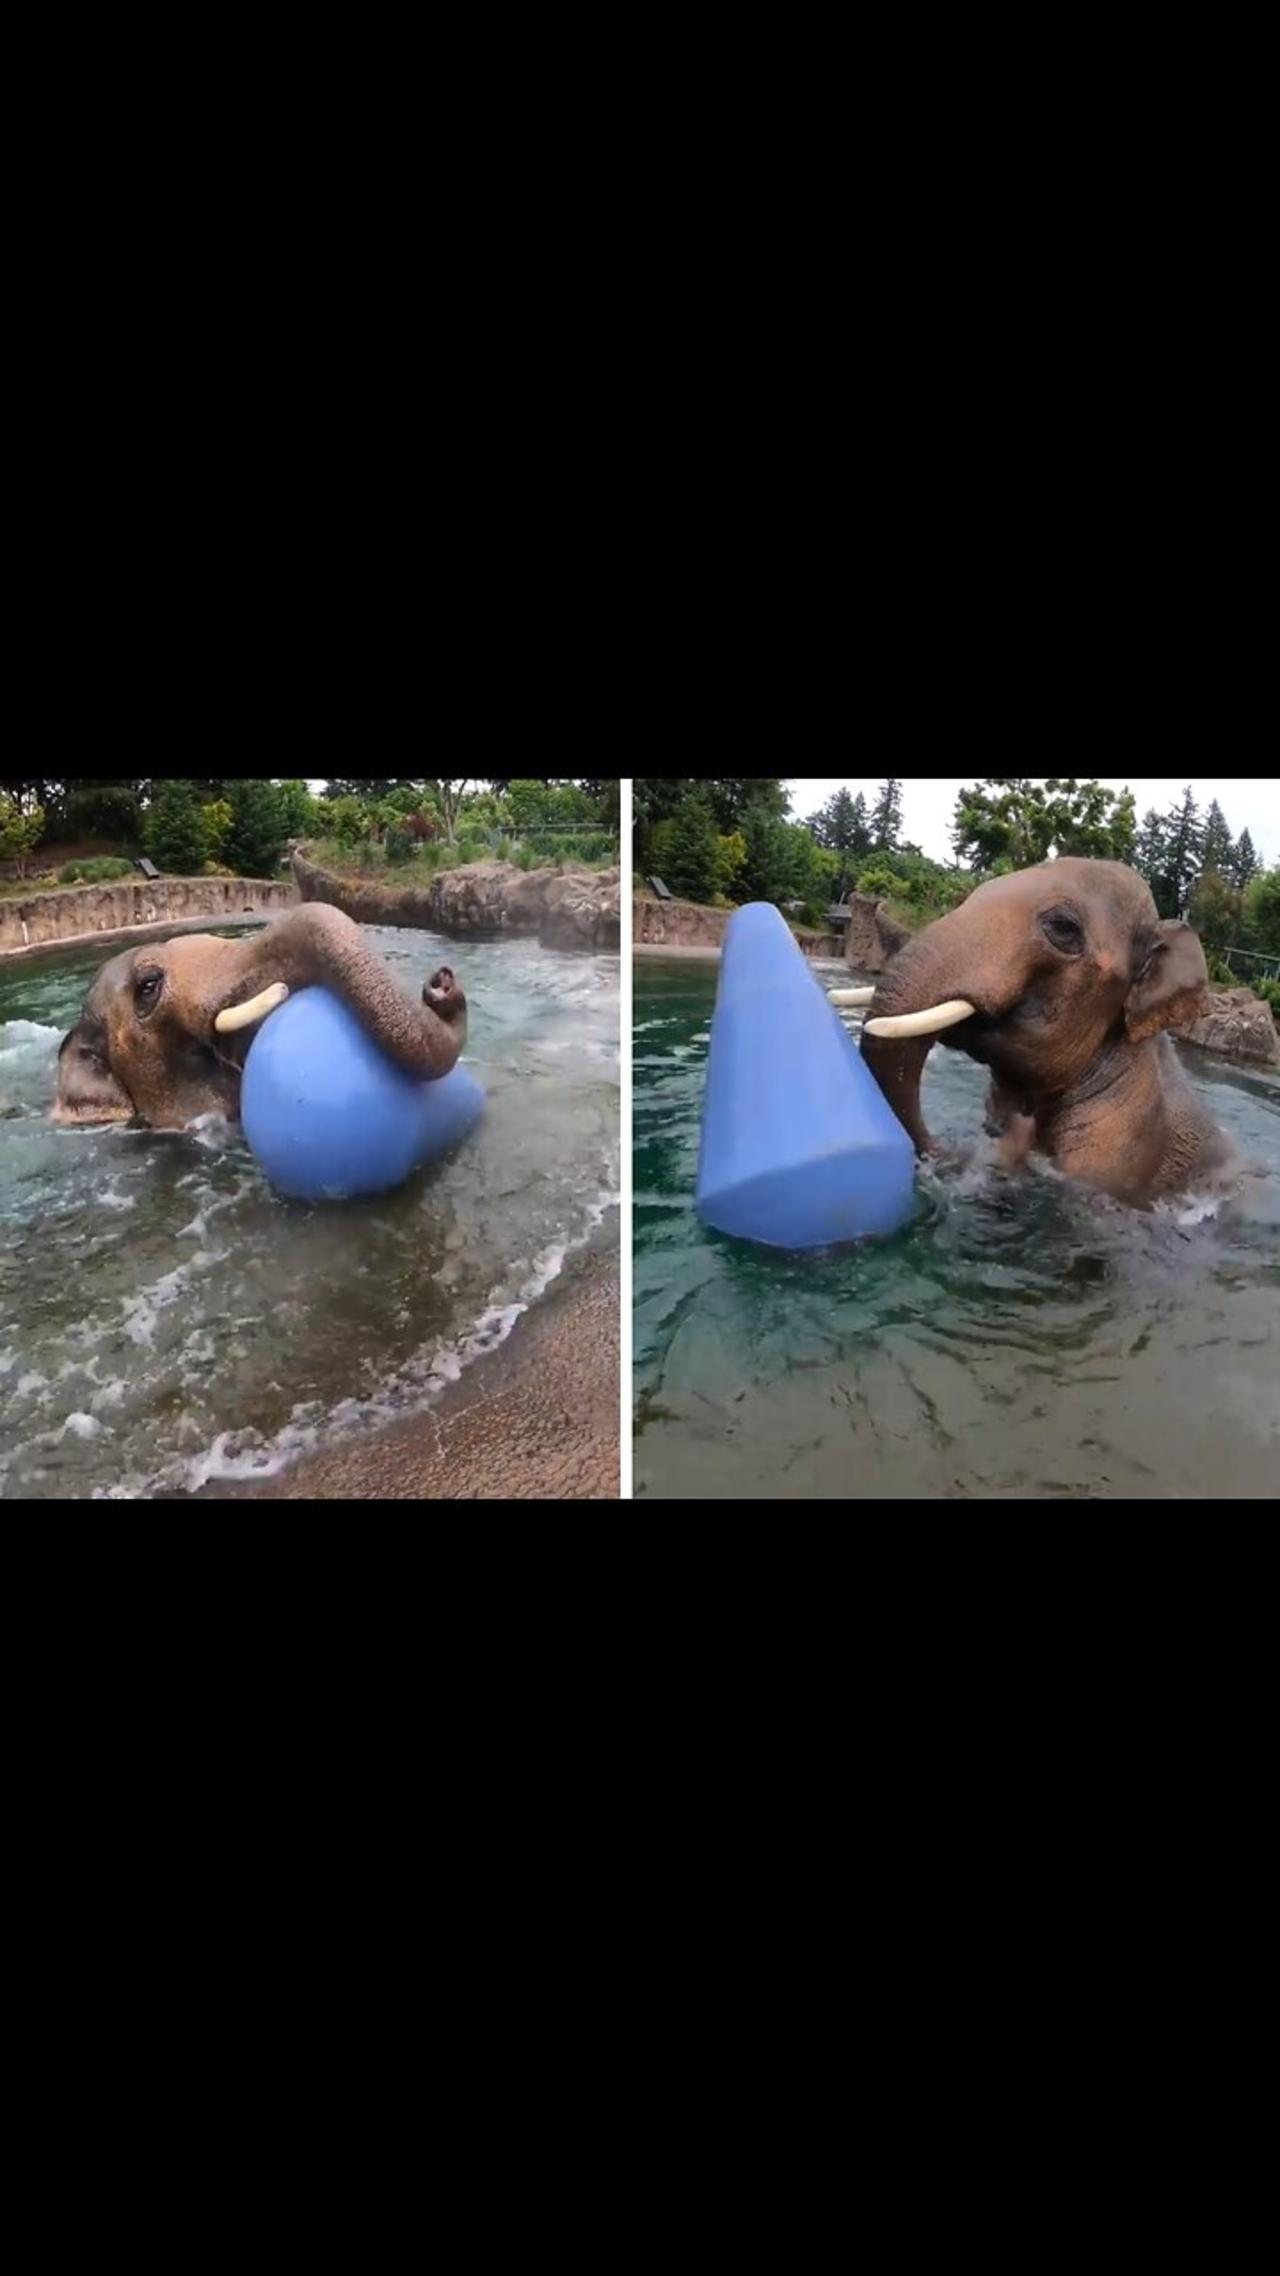 Asian Elephant Samudra Loves His New Toy